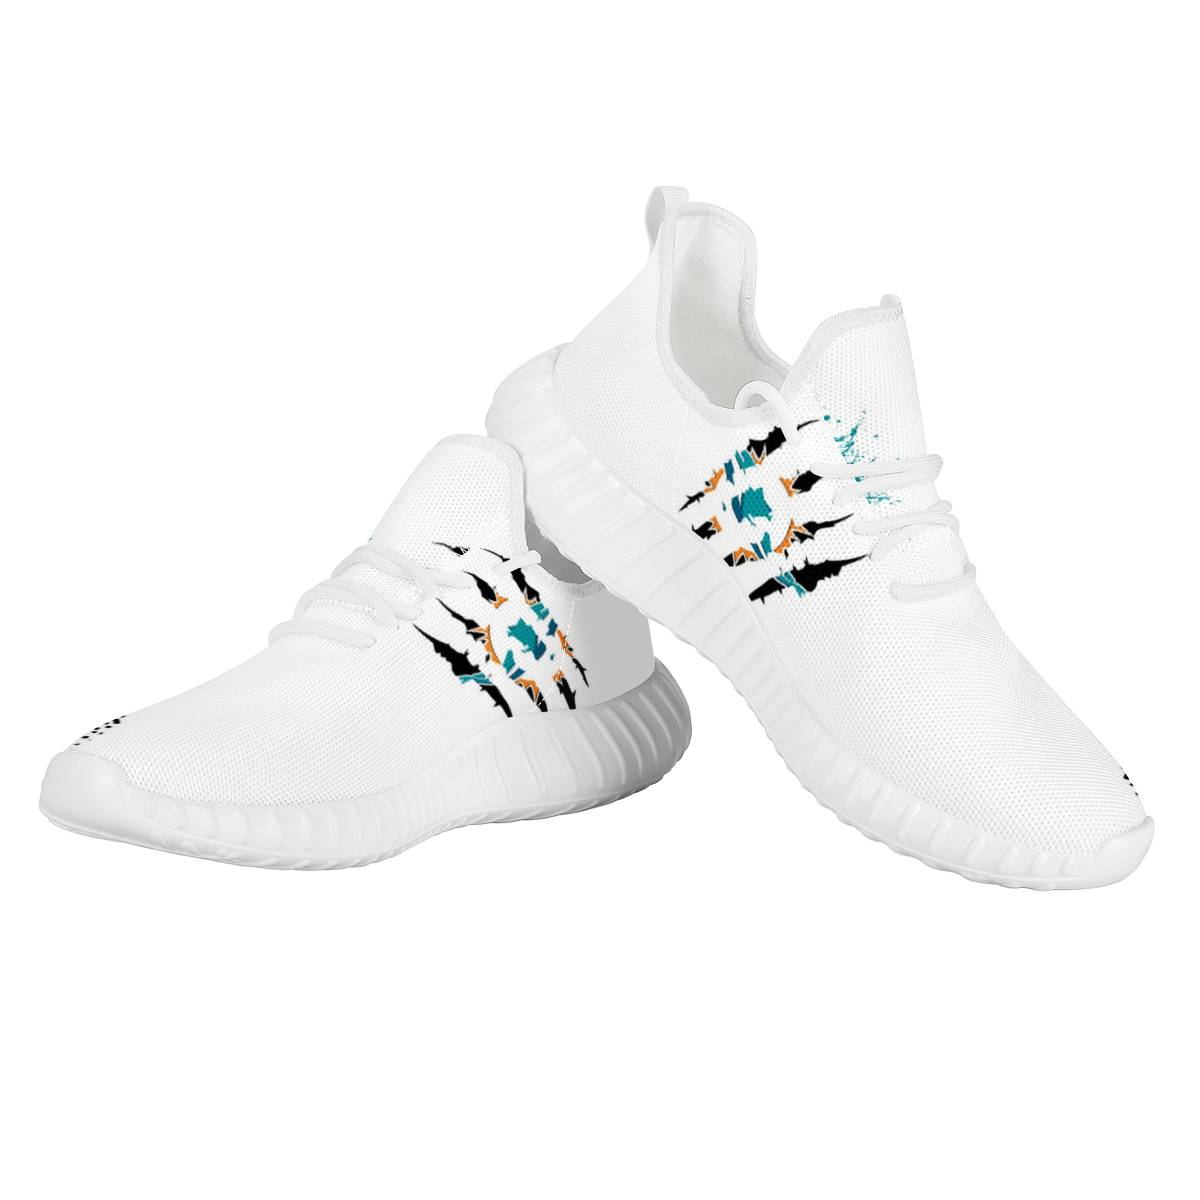 Men's Miami Dolphins Mesh Knit Sneakers/Shoes 011